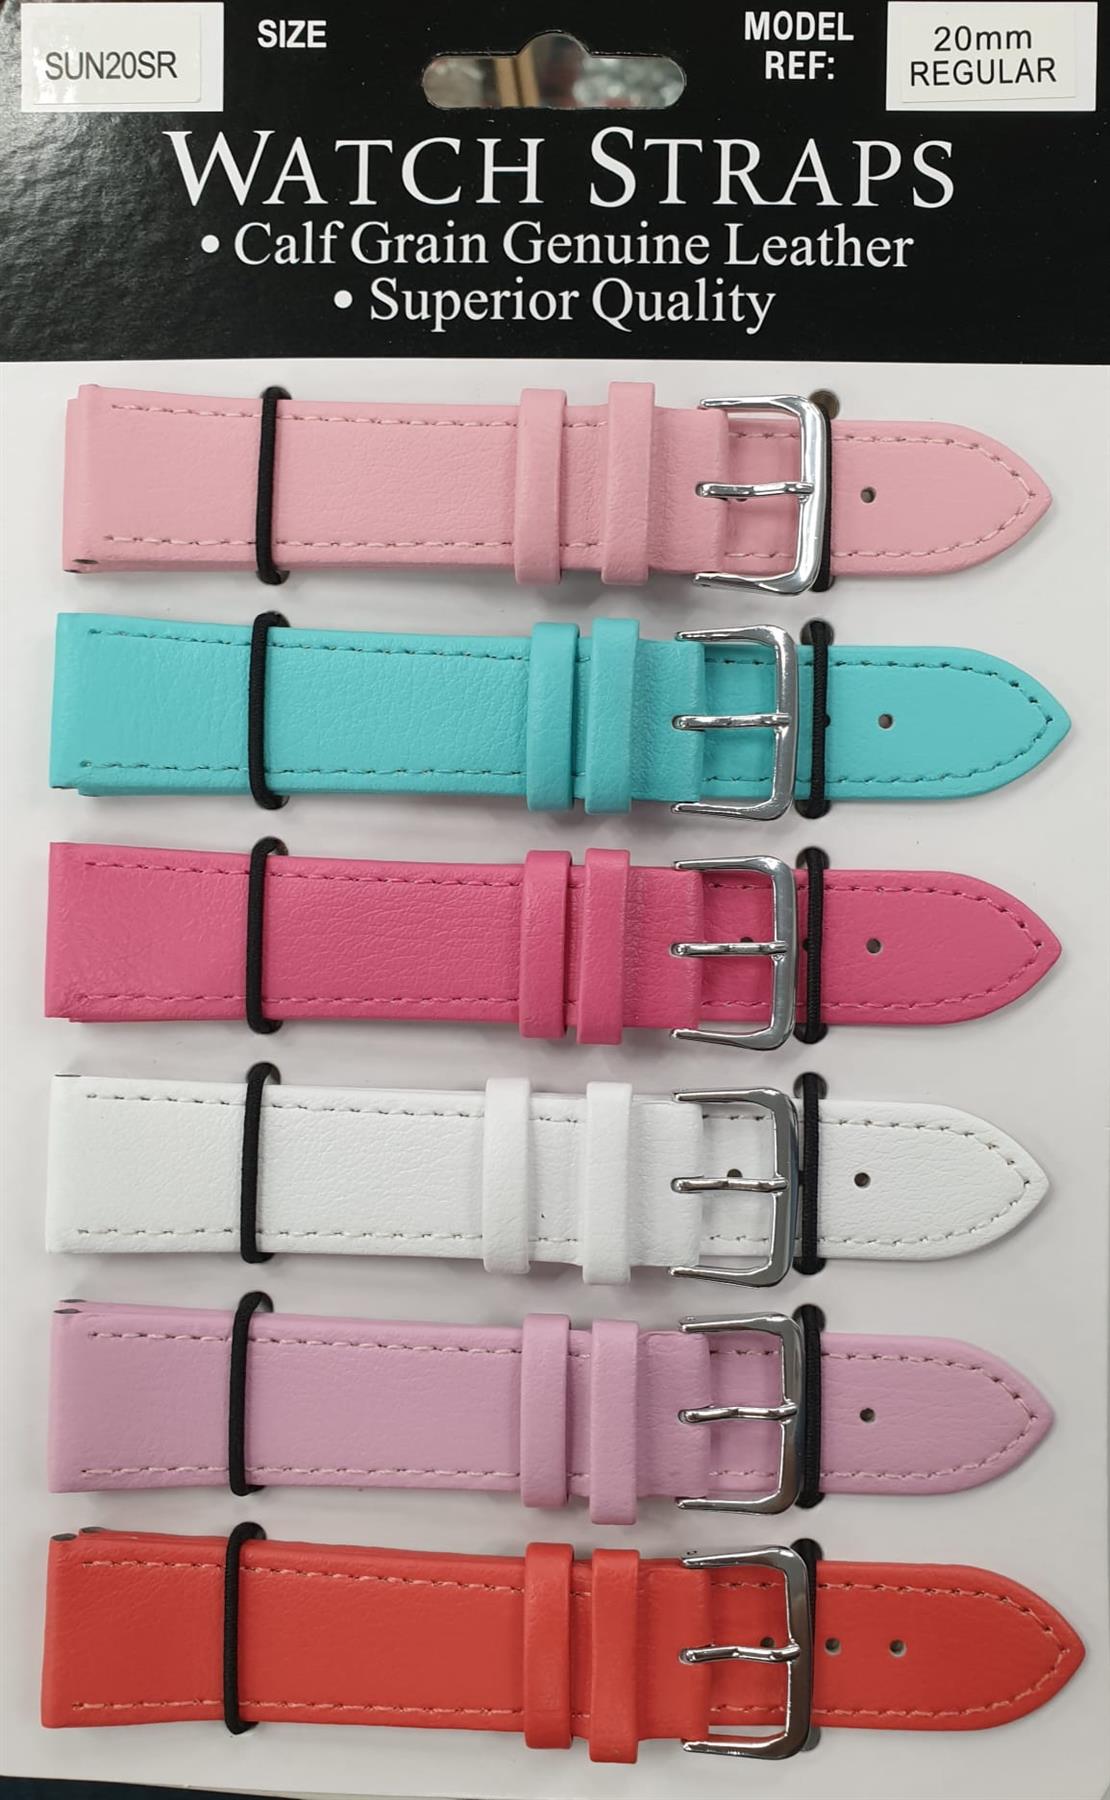 SUNSR Sun Mixed Colour Calf Leather Watch Straps Regular card of 6 - Silver Buckle